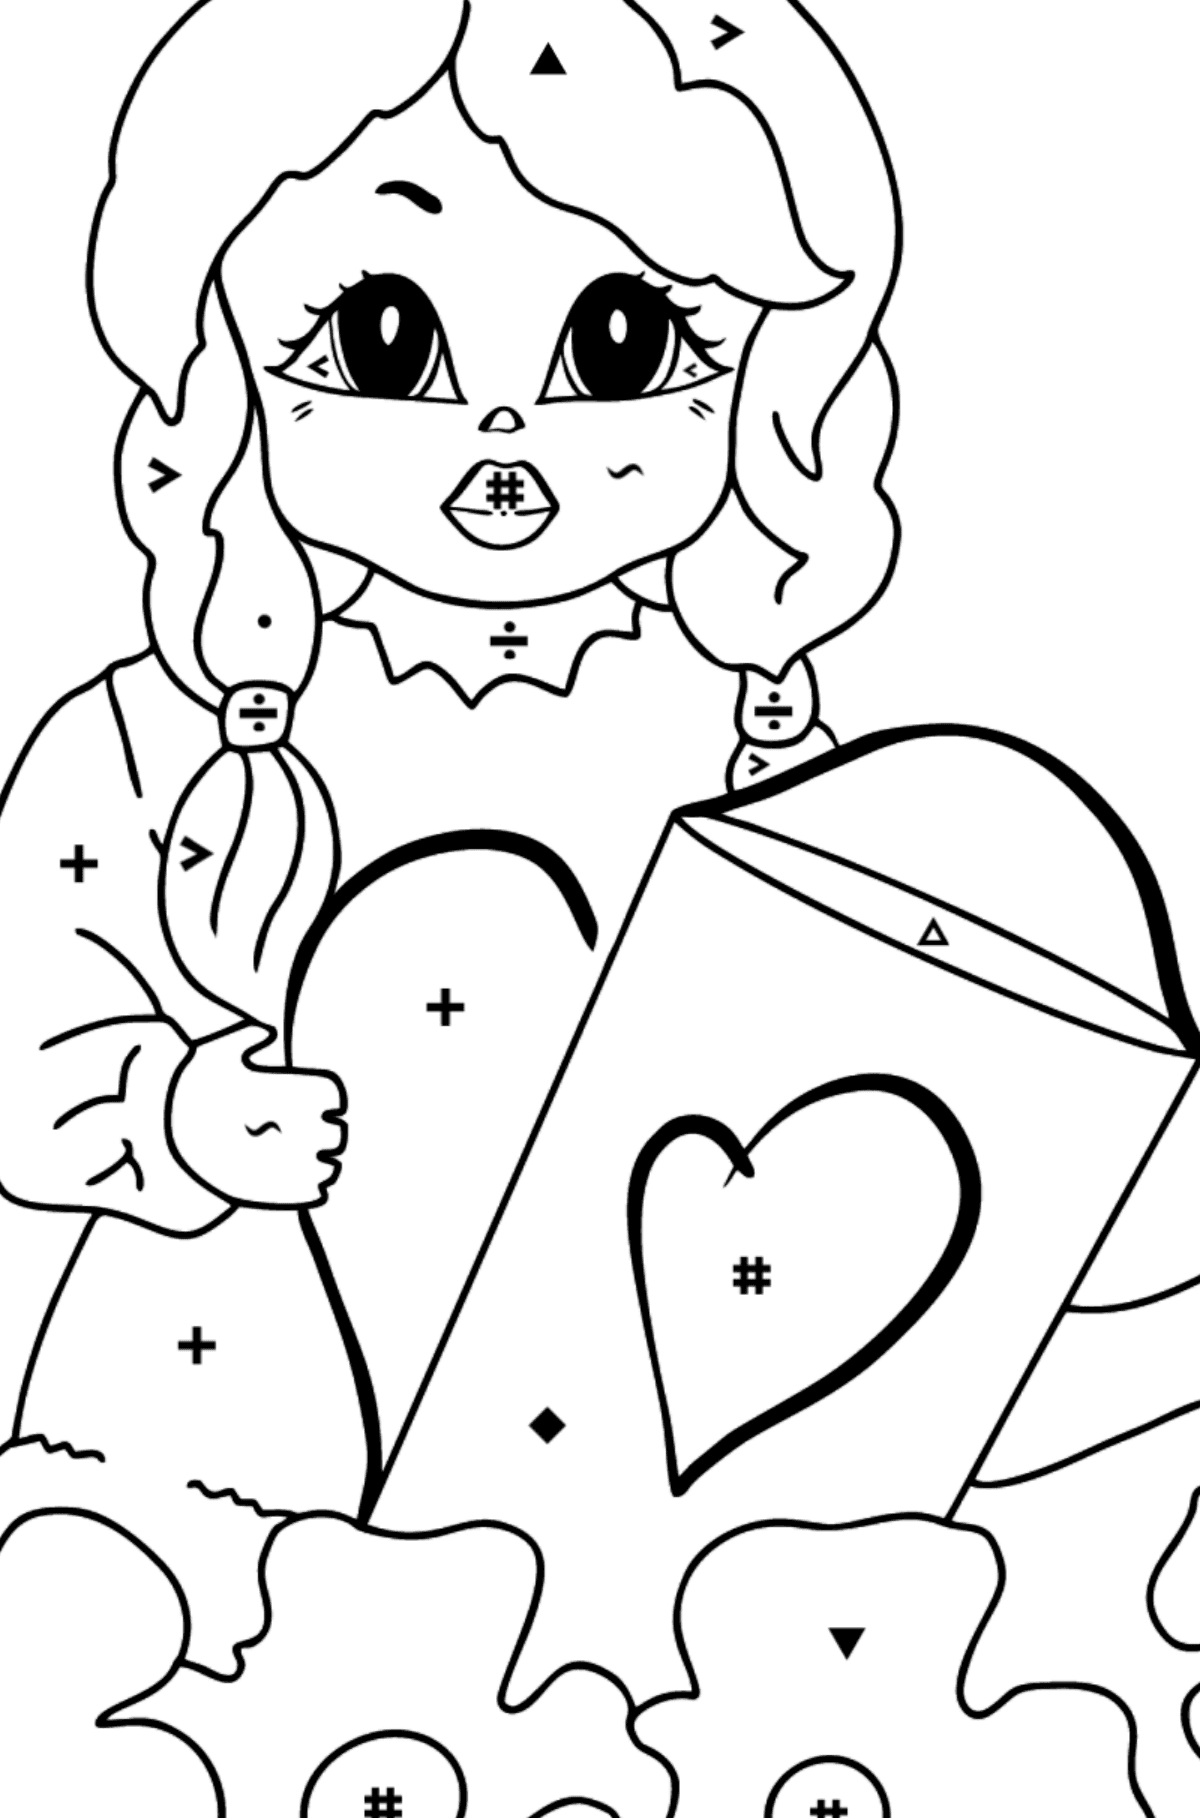 Coloring Page - A Princess with a Watering Can - Coloring by Symbols for Kids